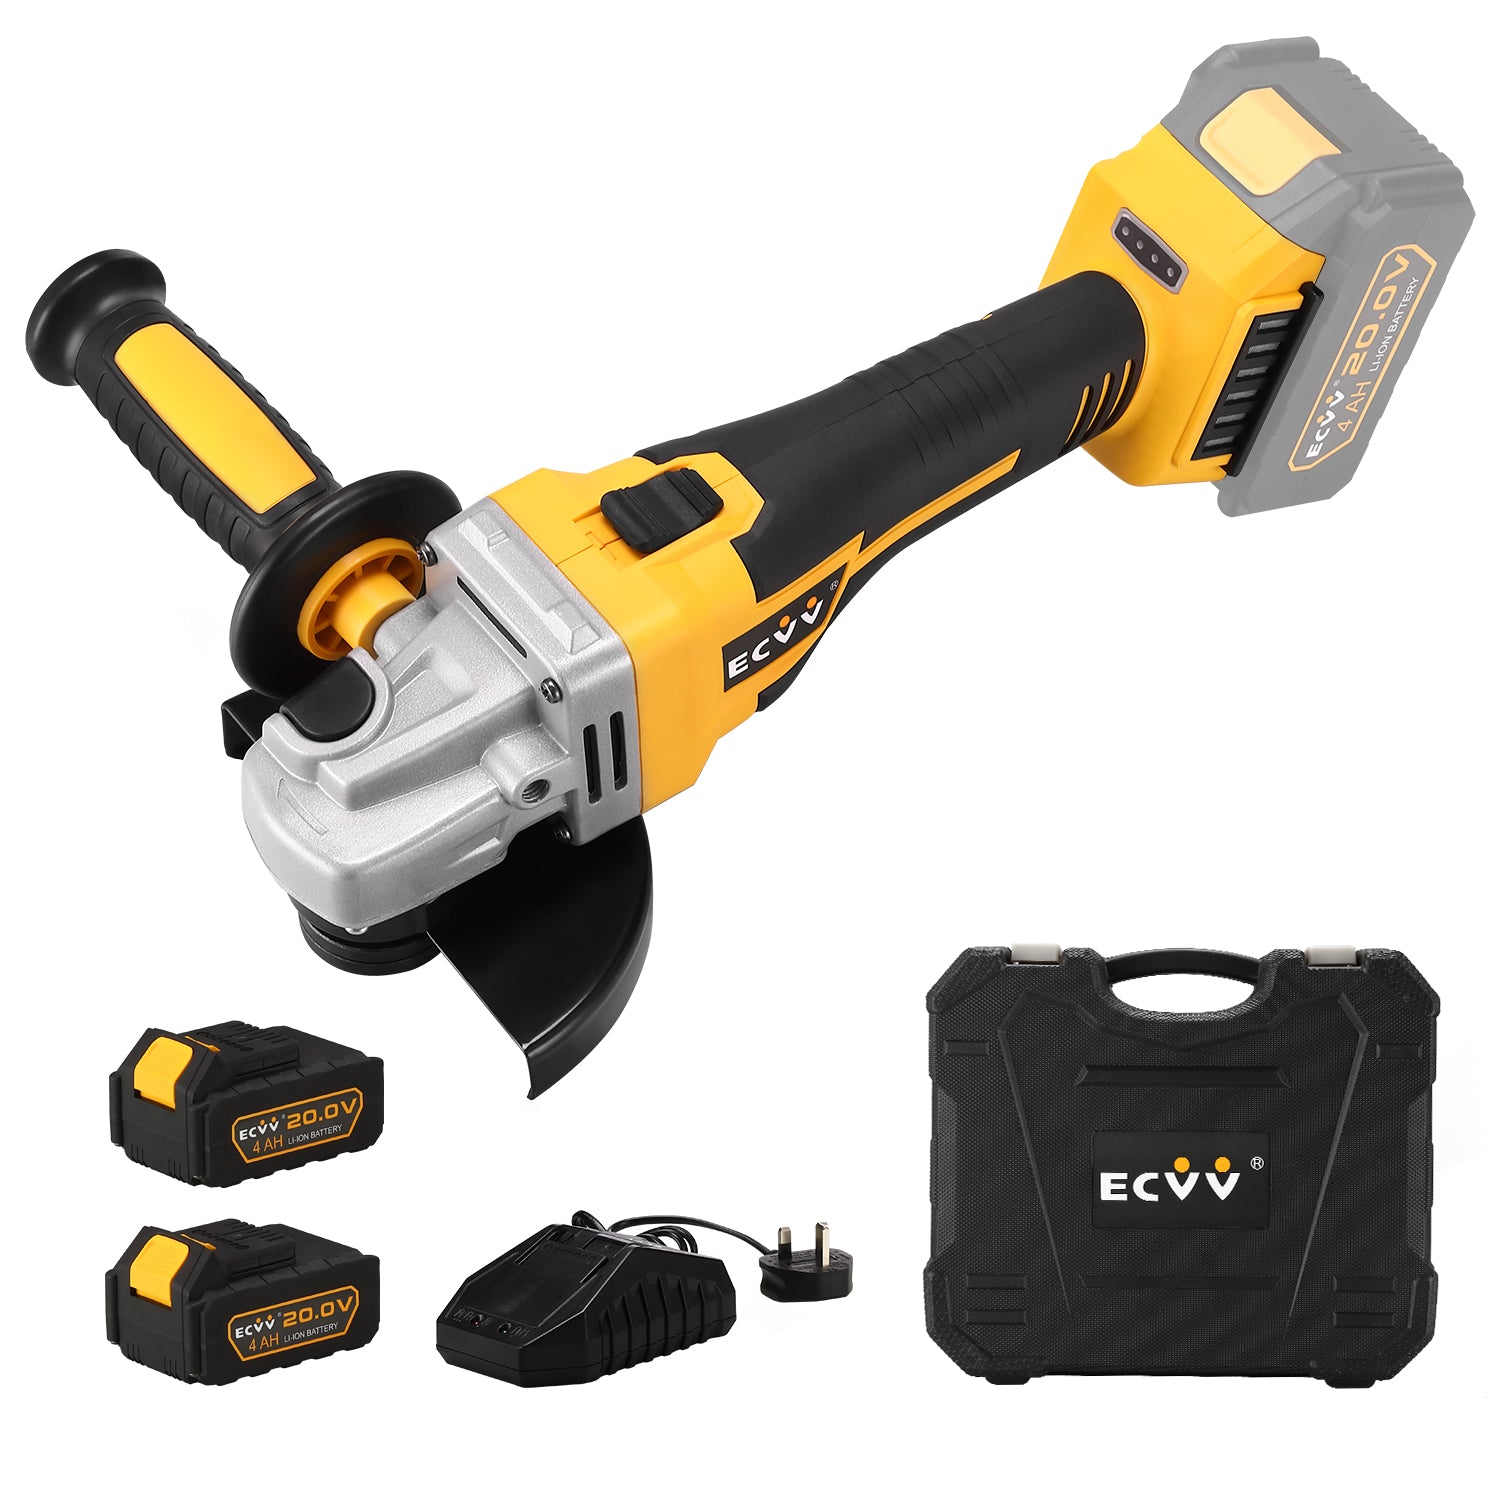 ECVV 20V Cordless Angle Grinder,115/125mm 800W Power Grinder, Fast Charger, 9000RPM Brushless Motor, 2-Position Adjustable Auxiliary Handle